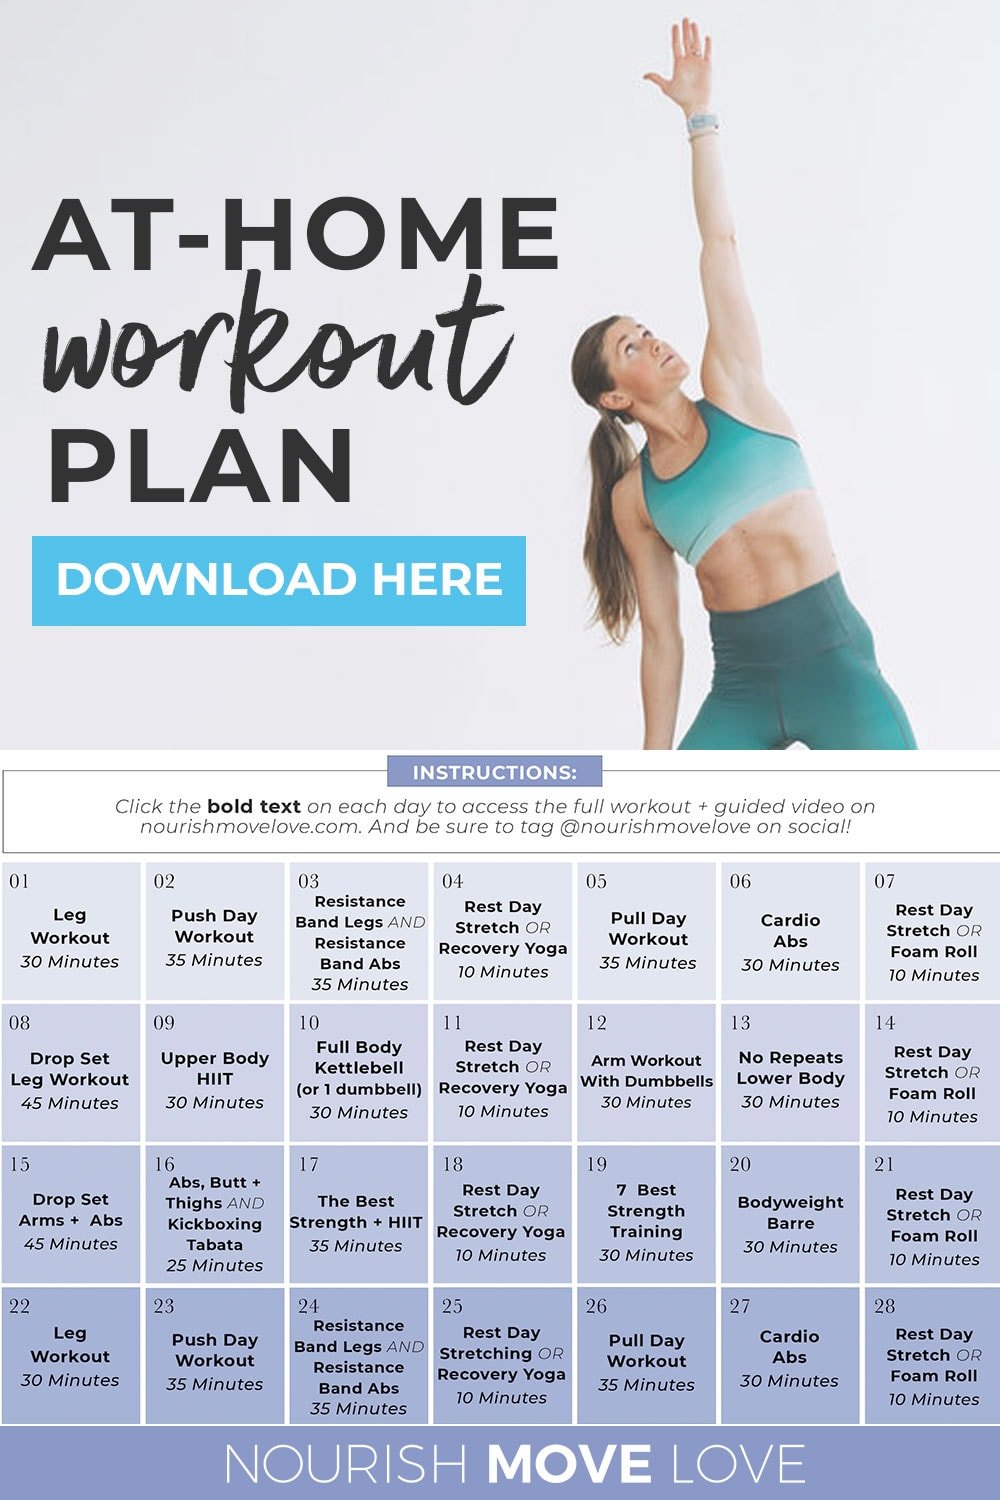 a-7-day-weight-loss-workout-plan-fitness-myfitnesspal